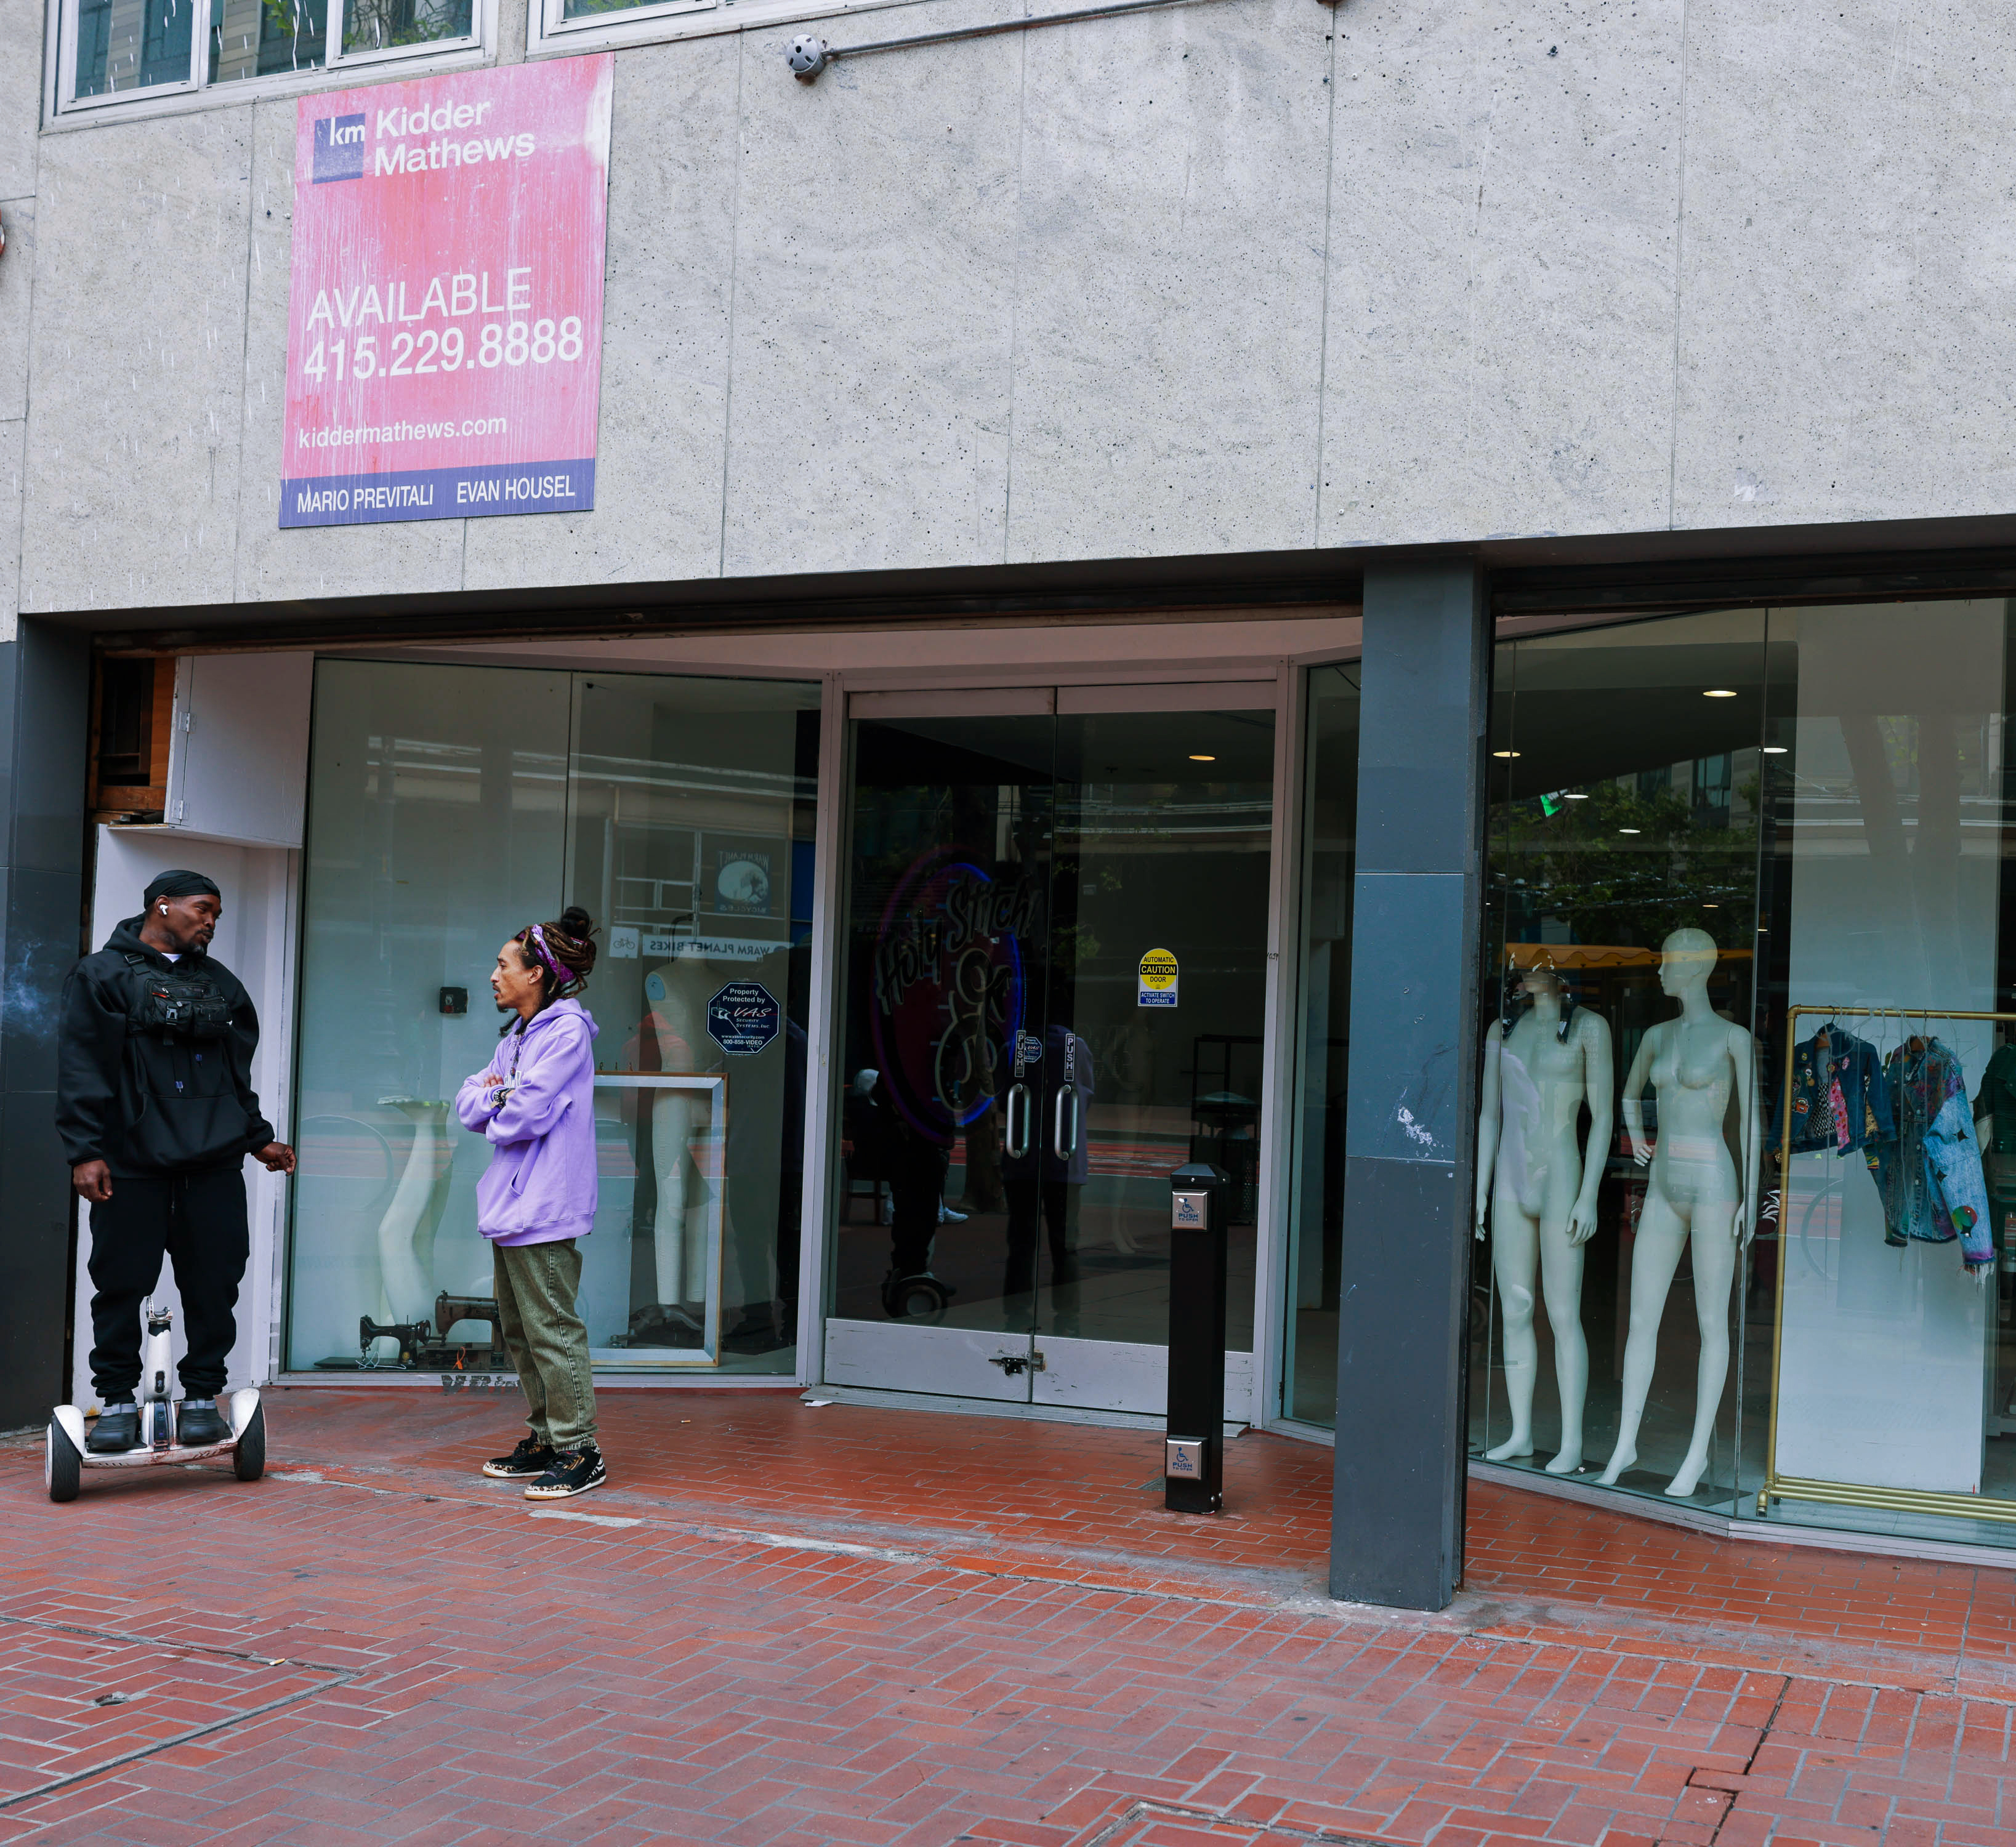 Two people converse outside a store with mannequins and a 'For Lease' sign above.